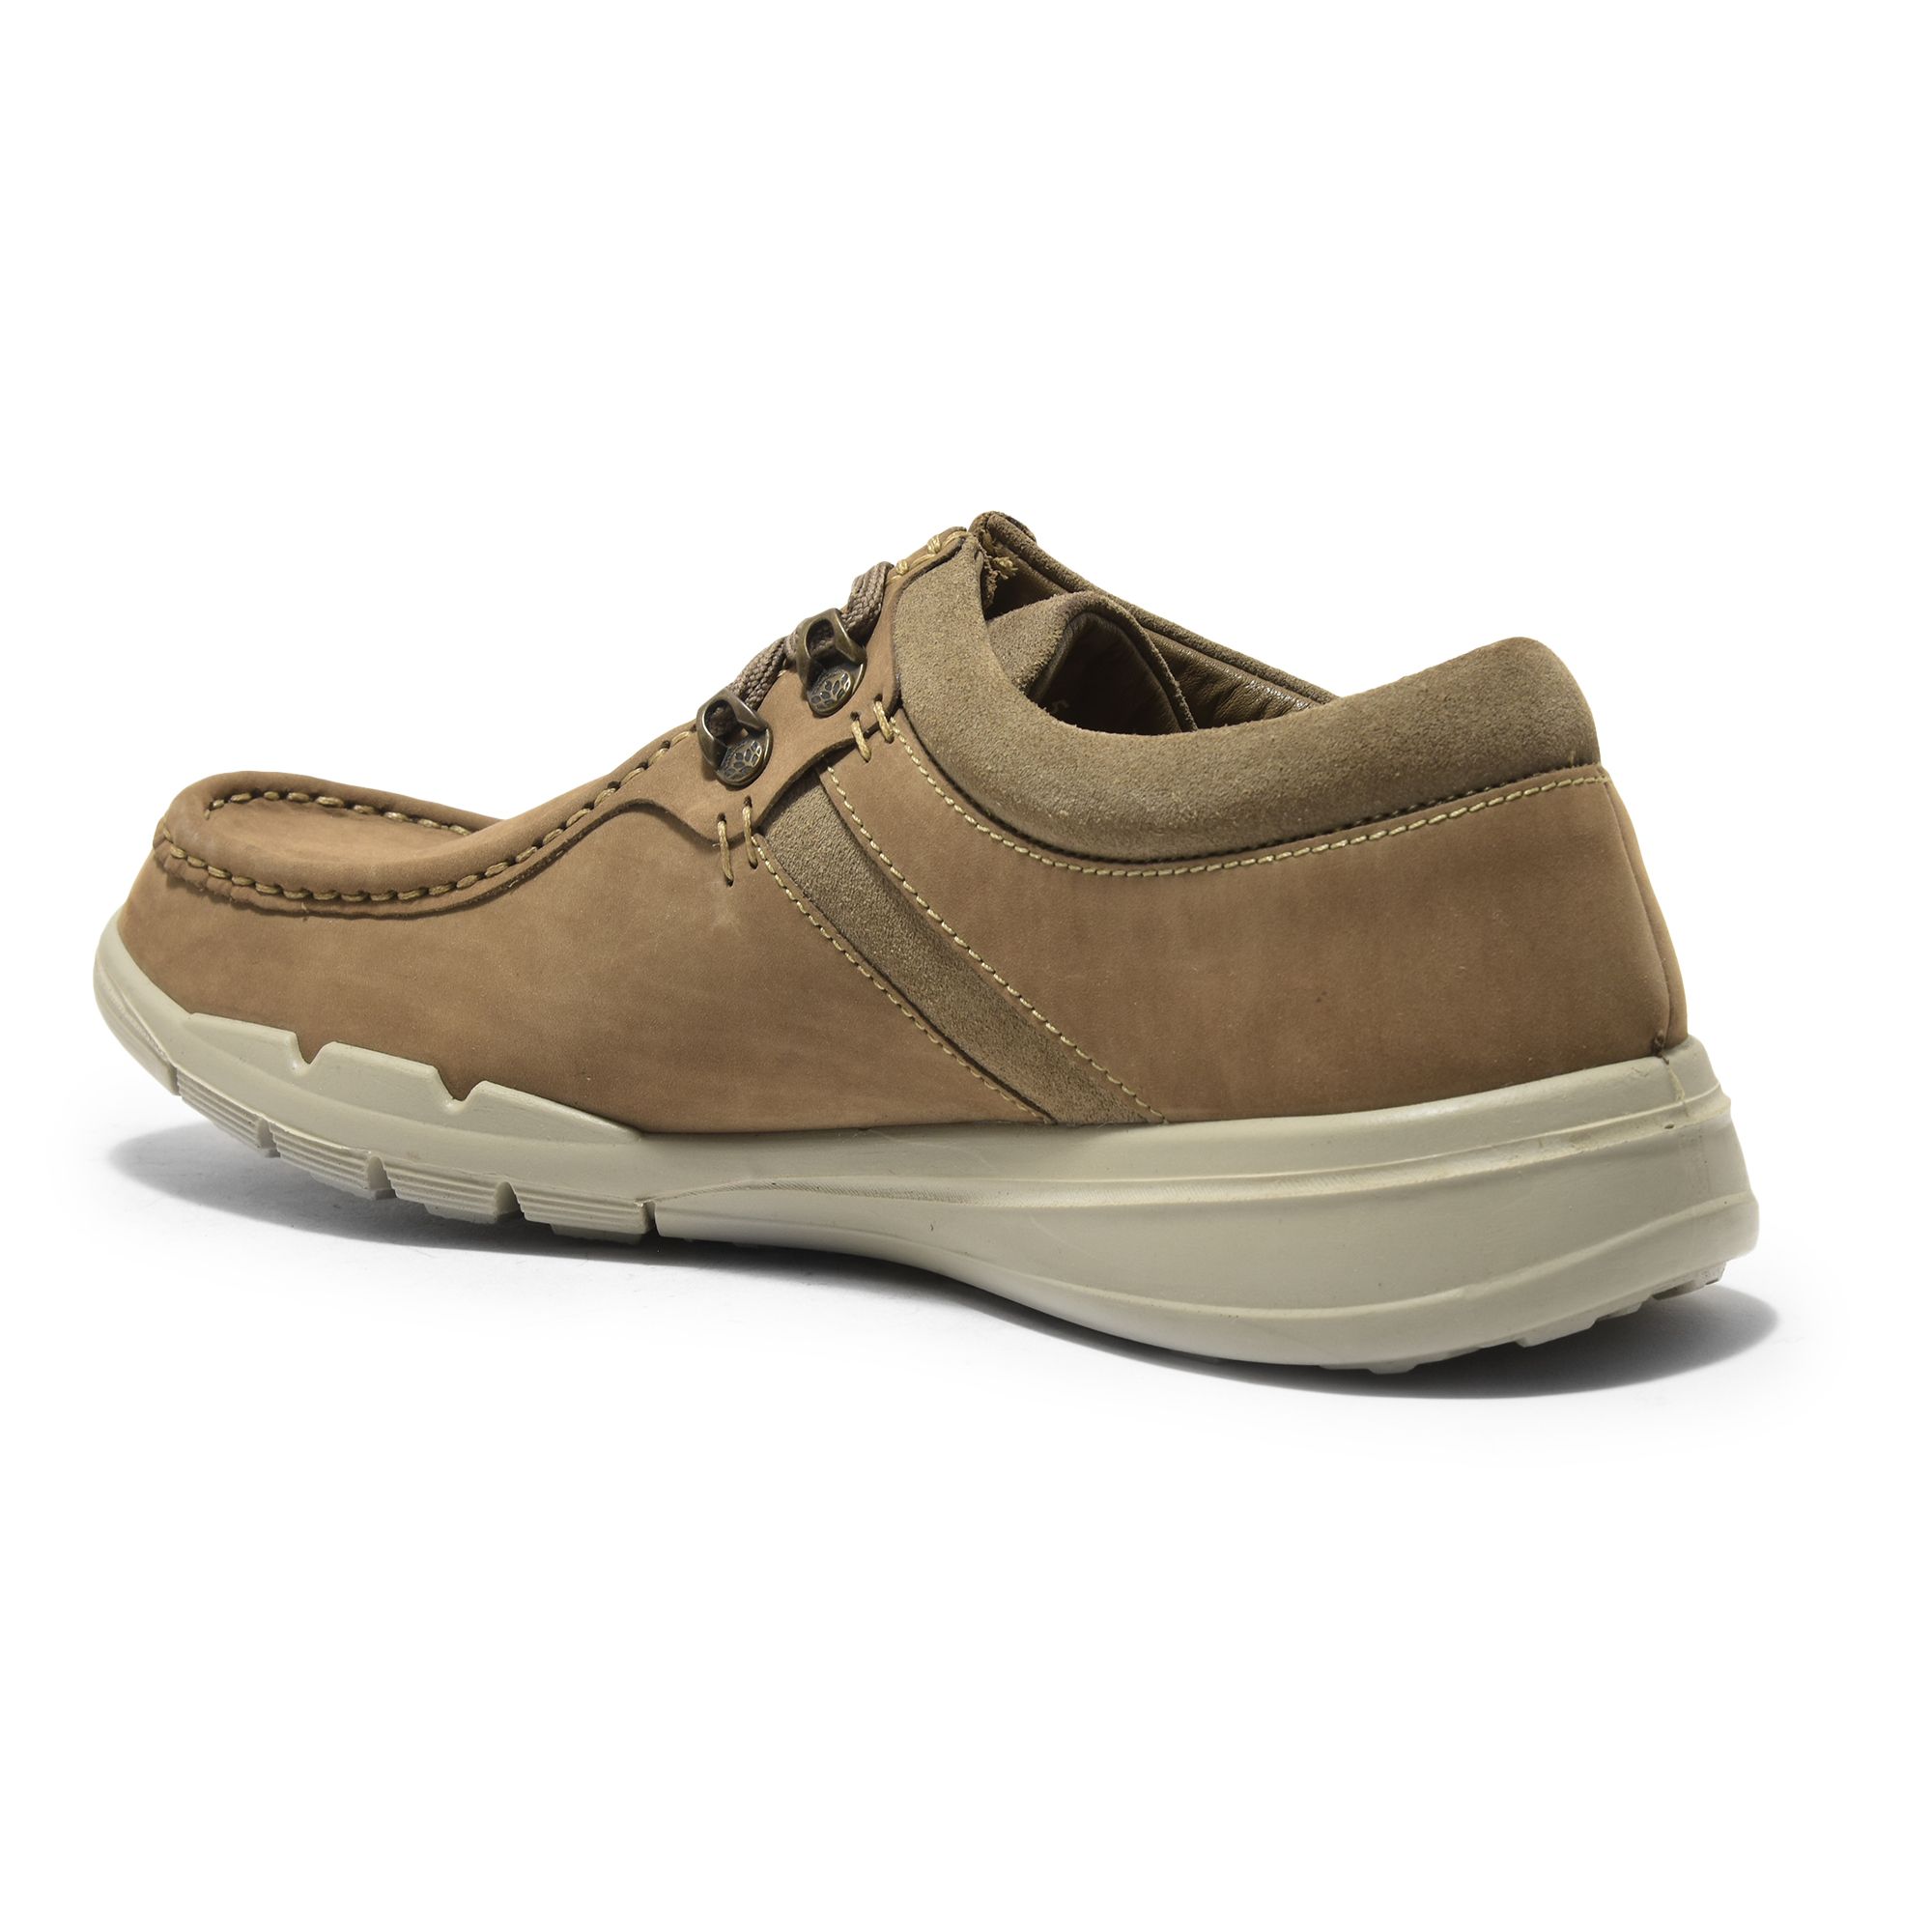 WOODLAND Casual Shoes For Men - Buy WOODLAND Casual Shoes For Men Online at  Best Price - Shop Online for Footwears in India | Flipkart.com